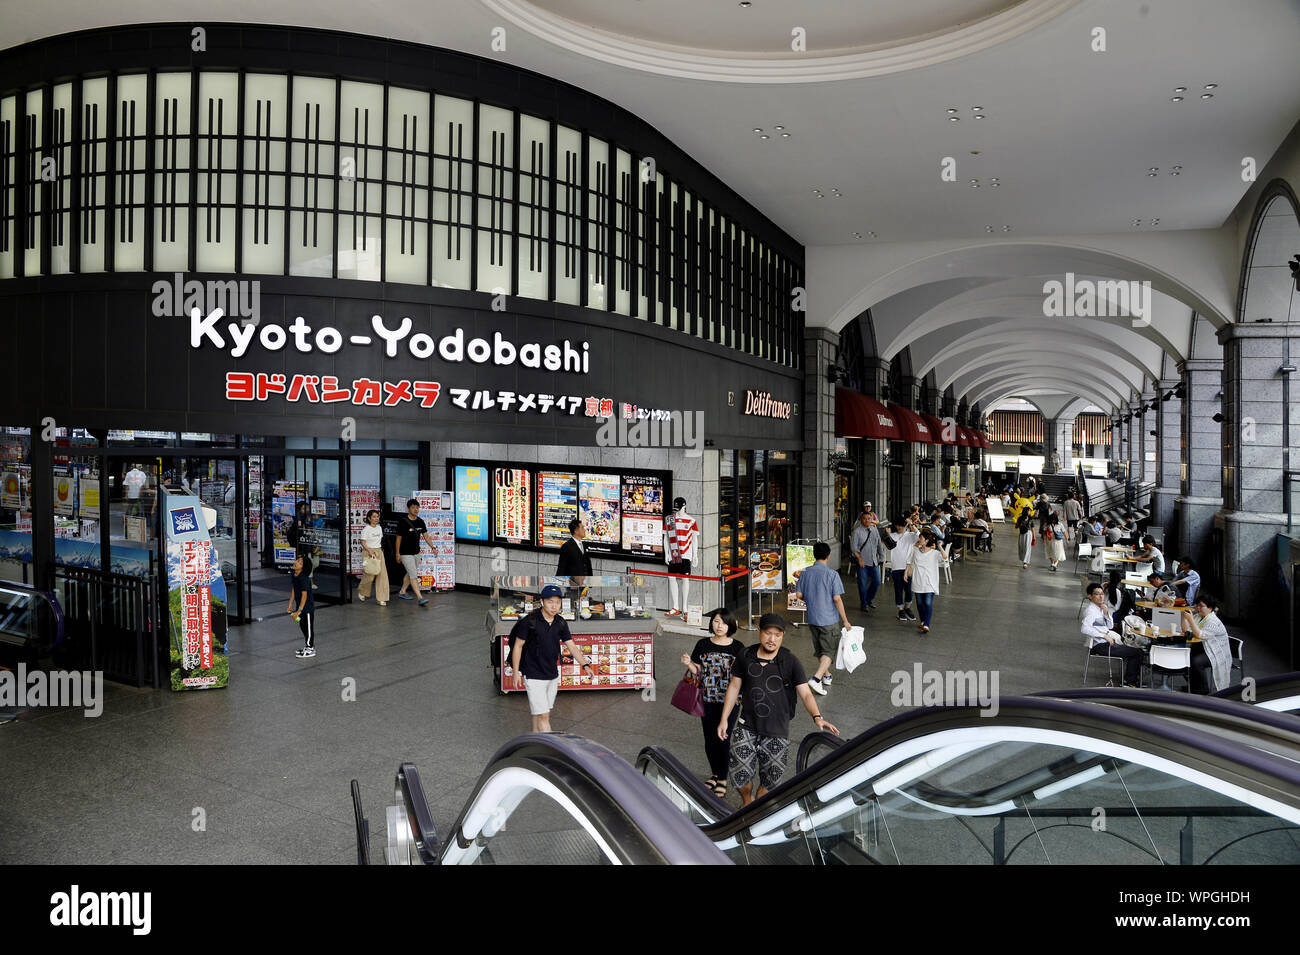 Kyoto Station Store High Resolution Stock Photography and Images - Alamy